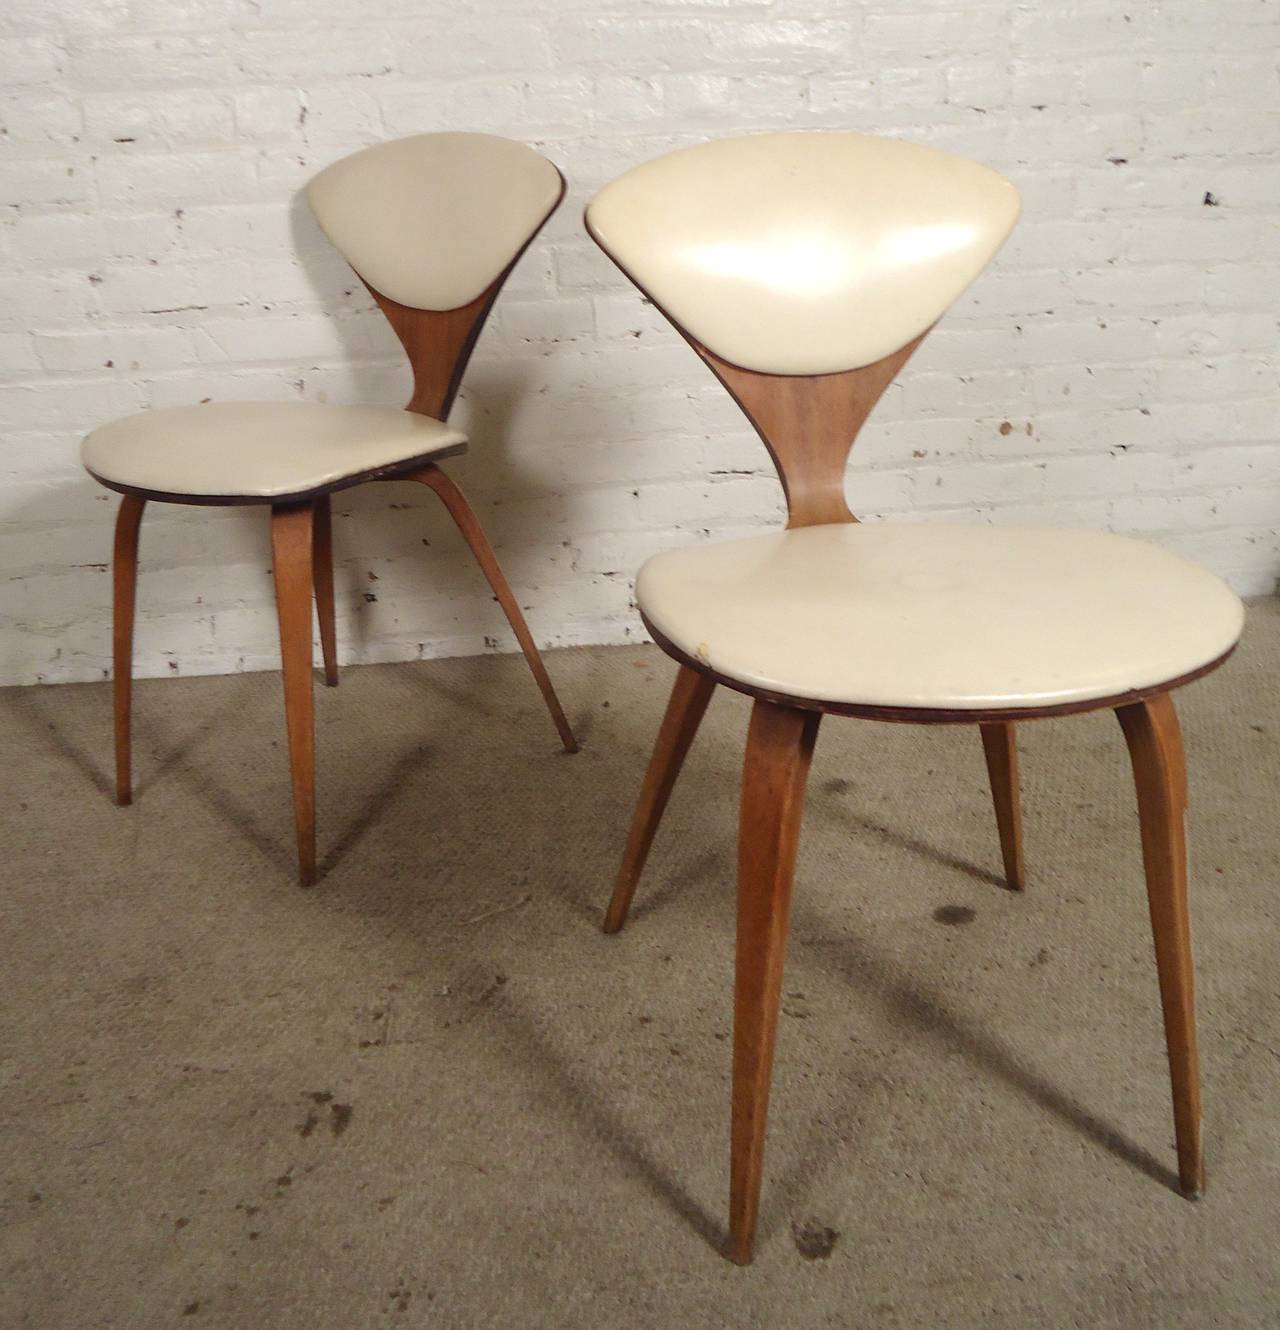 American Pair of Norman Cherner Chairs by Plycraft